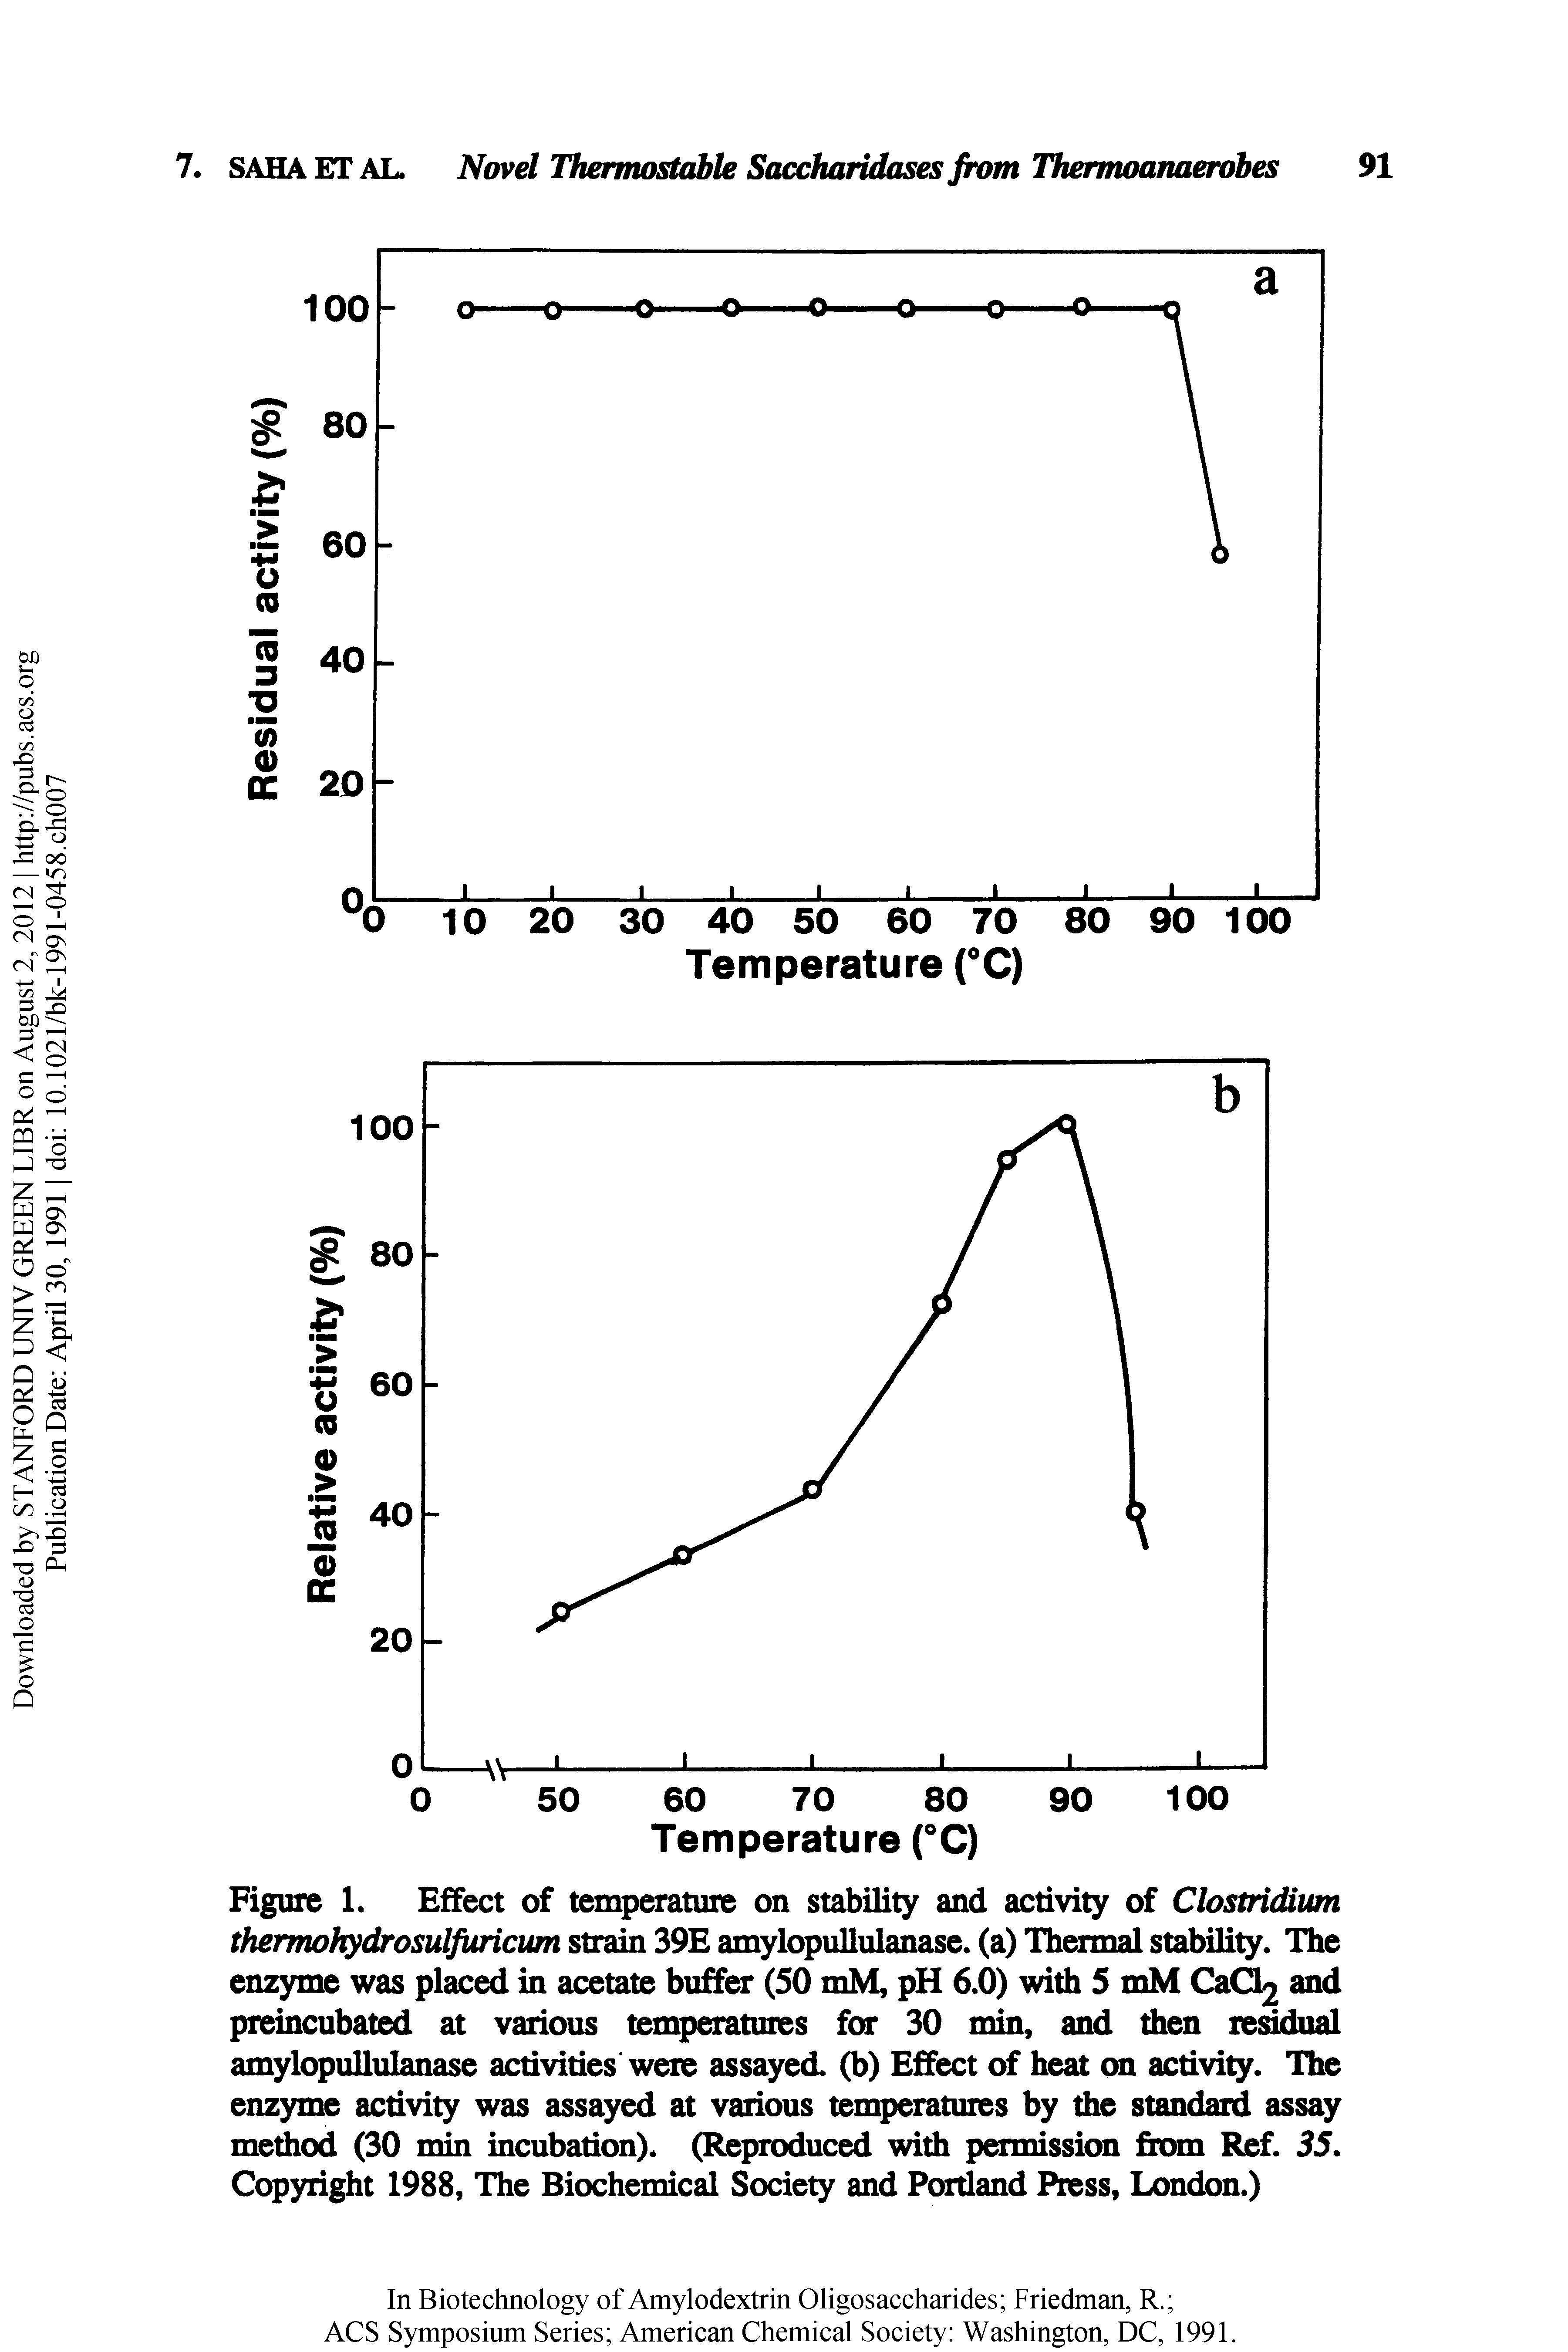 Figure 1. Effect of temperature on stability and activity of Clostridium thermohydrosulfUriciun strain 39E amylopuUulanase. (a) TherW stability. The enzyme was placed in acetate buffer (SO mM, pH 6.0) with 5 mM CaC and preincubated at various temperatures for 30 min, and then residual amylopuUulanase activities were assayed, (b) Effect of heat on activi. The enzyme activity was assayed at various temperatures by the standard assay method (30 min incubation). (Reproduced with permission from Ref. 55. Copyright 1988, The Biochemical Society and Pordand Press, London.)...